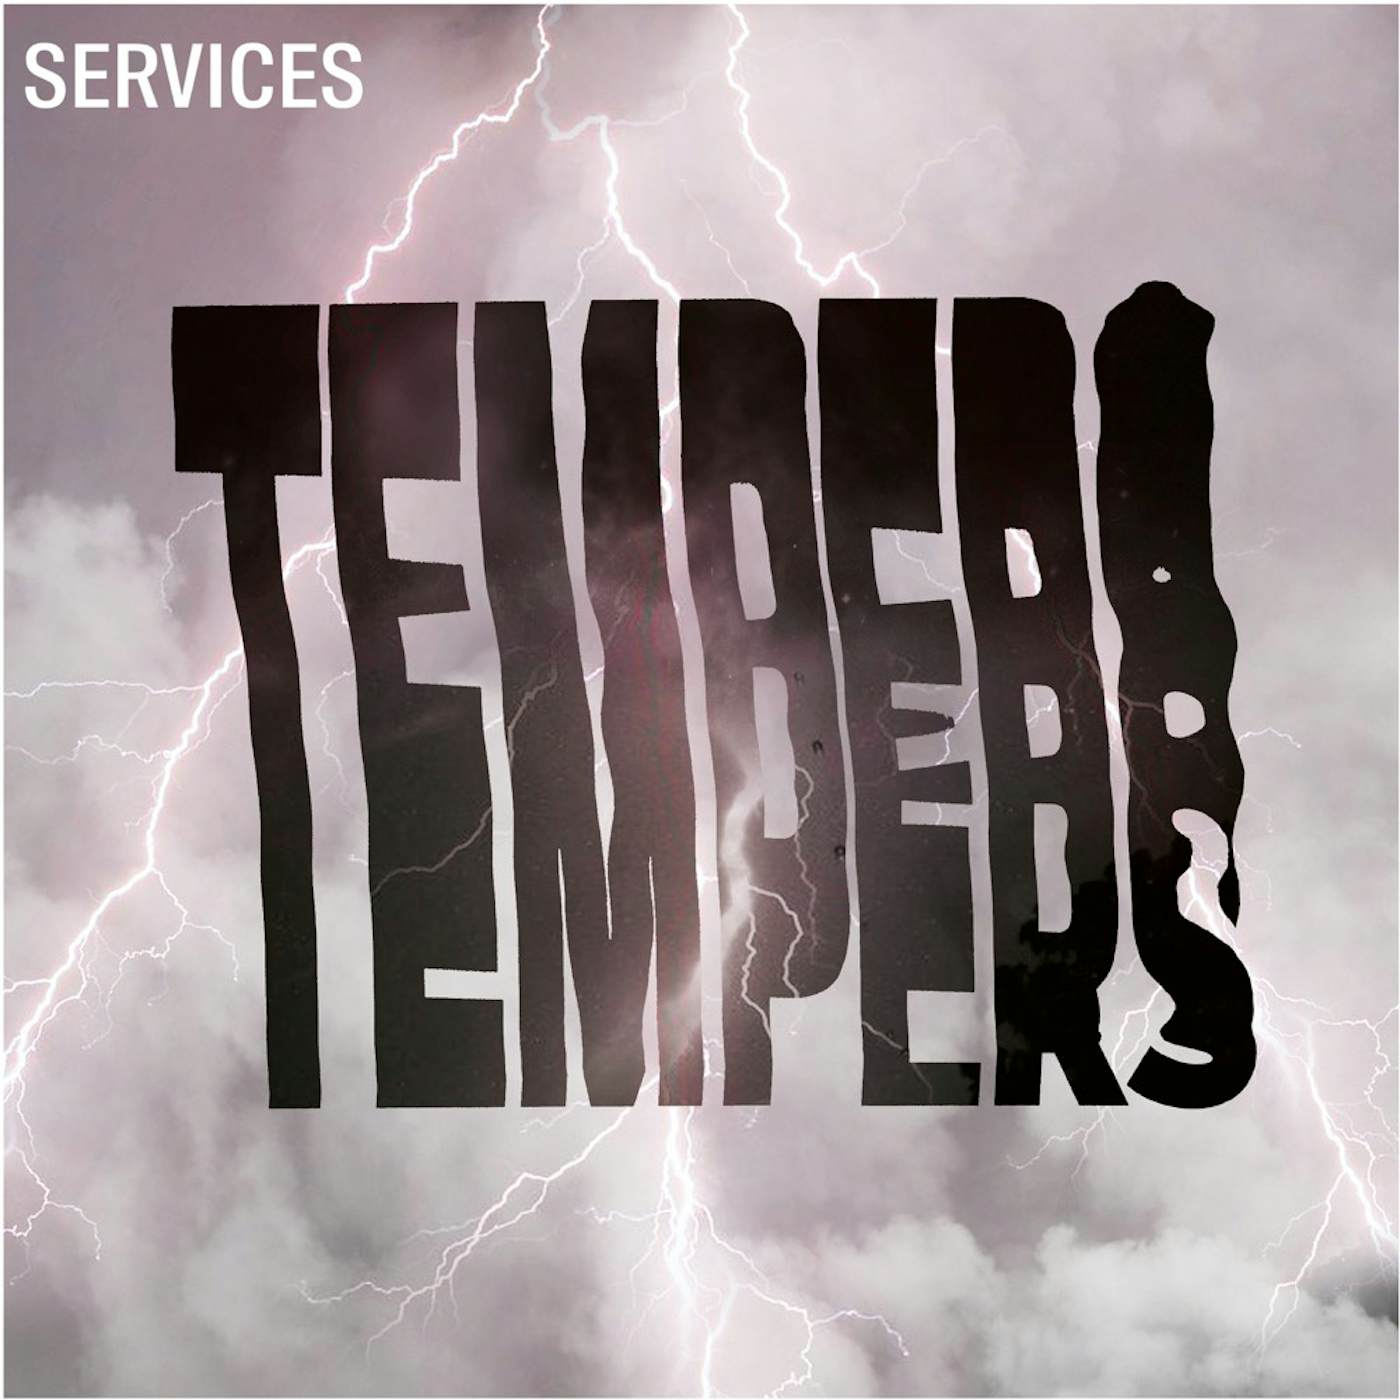 Tempers Services Vinyl Record